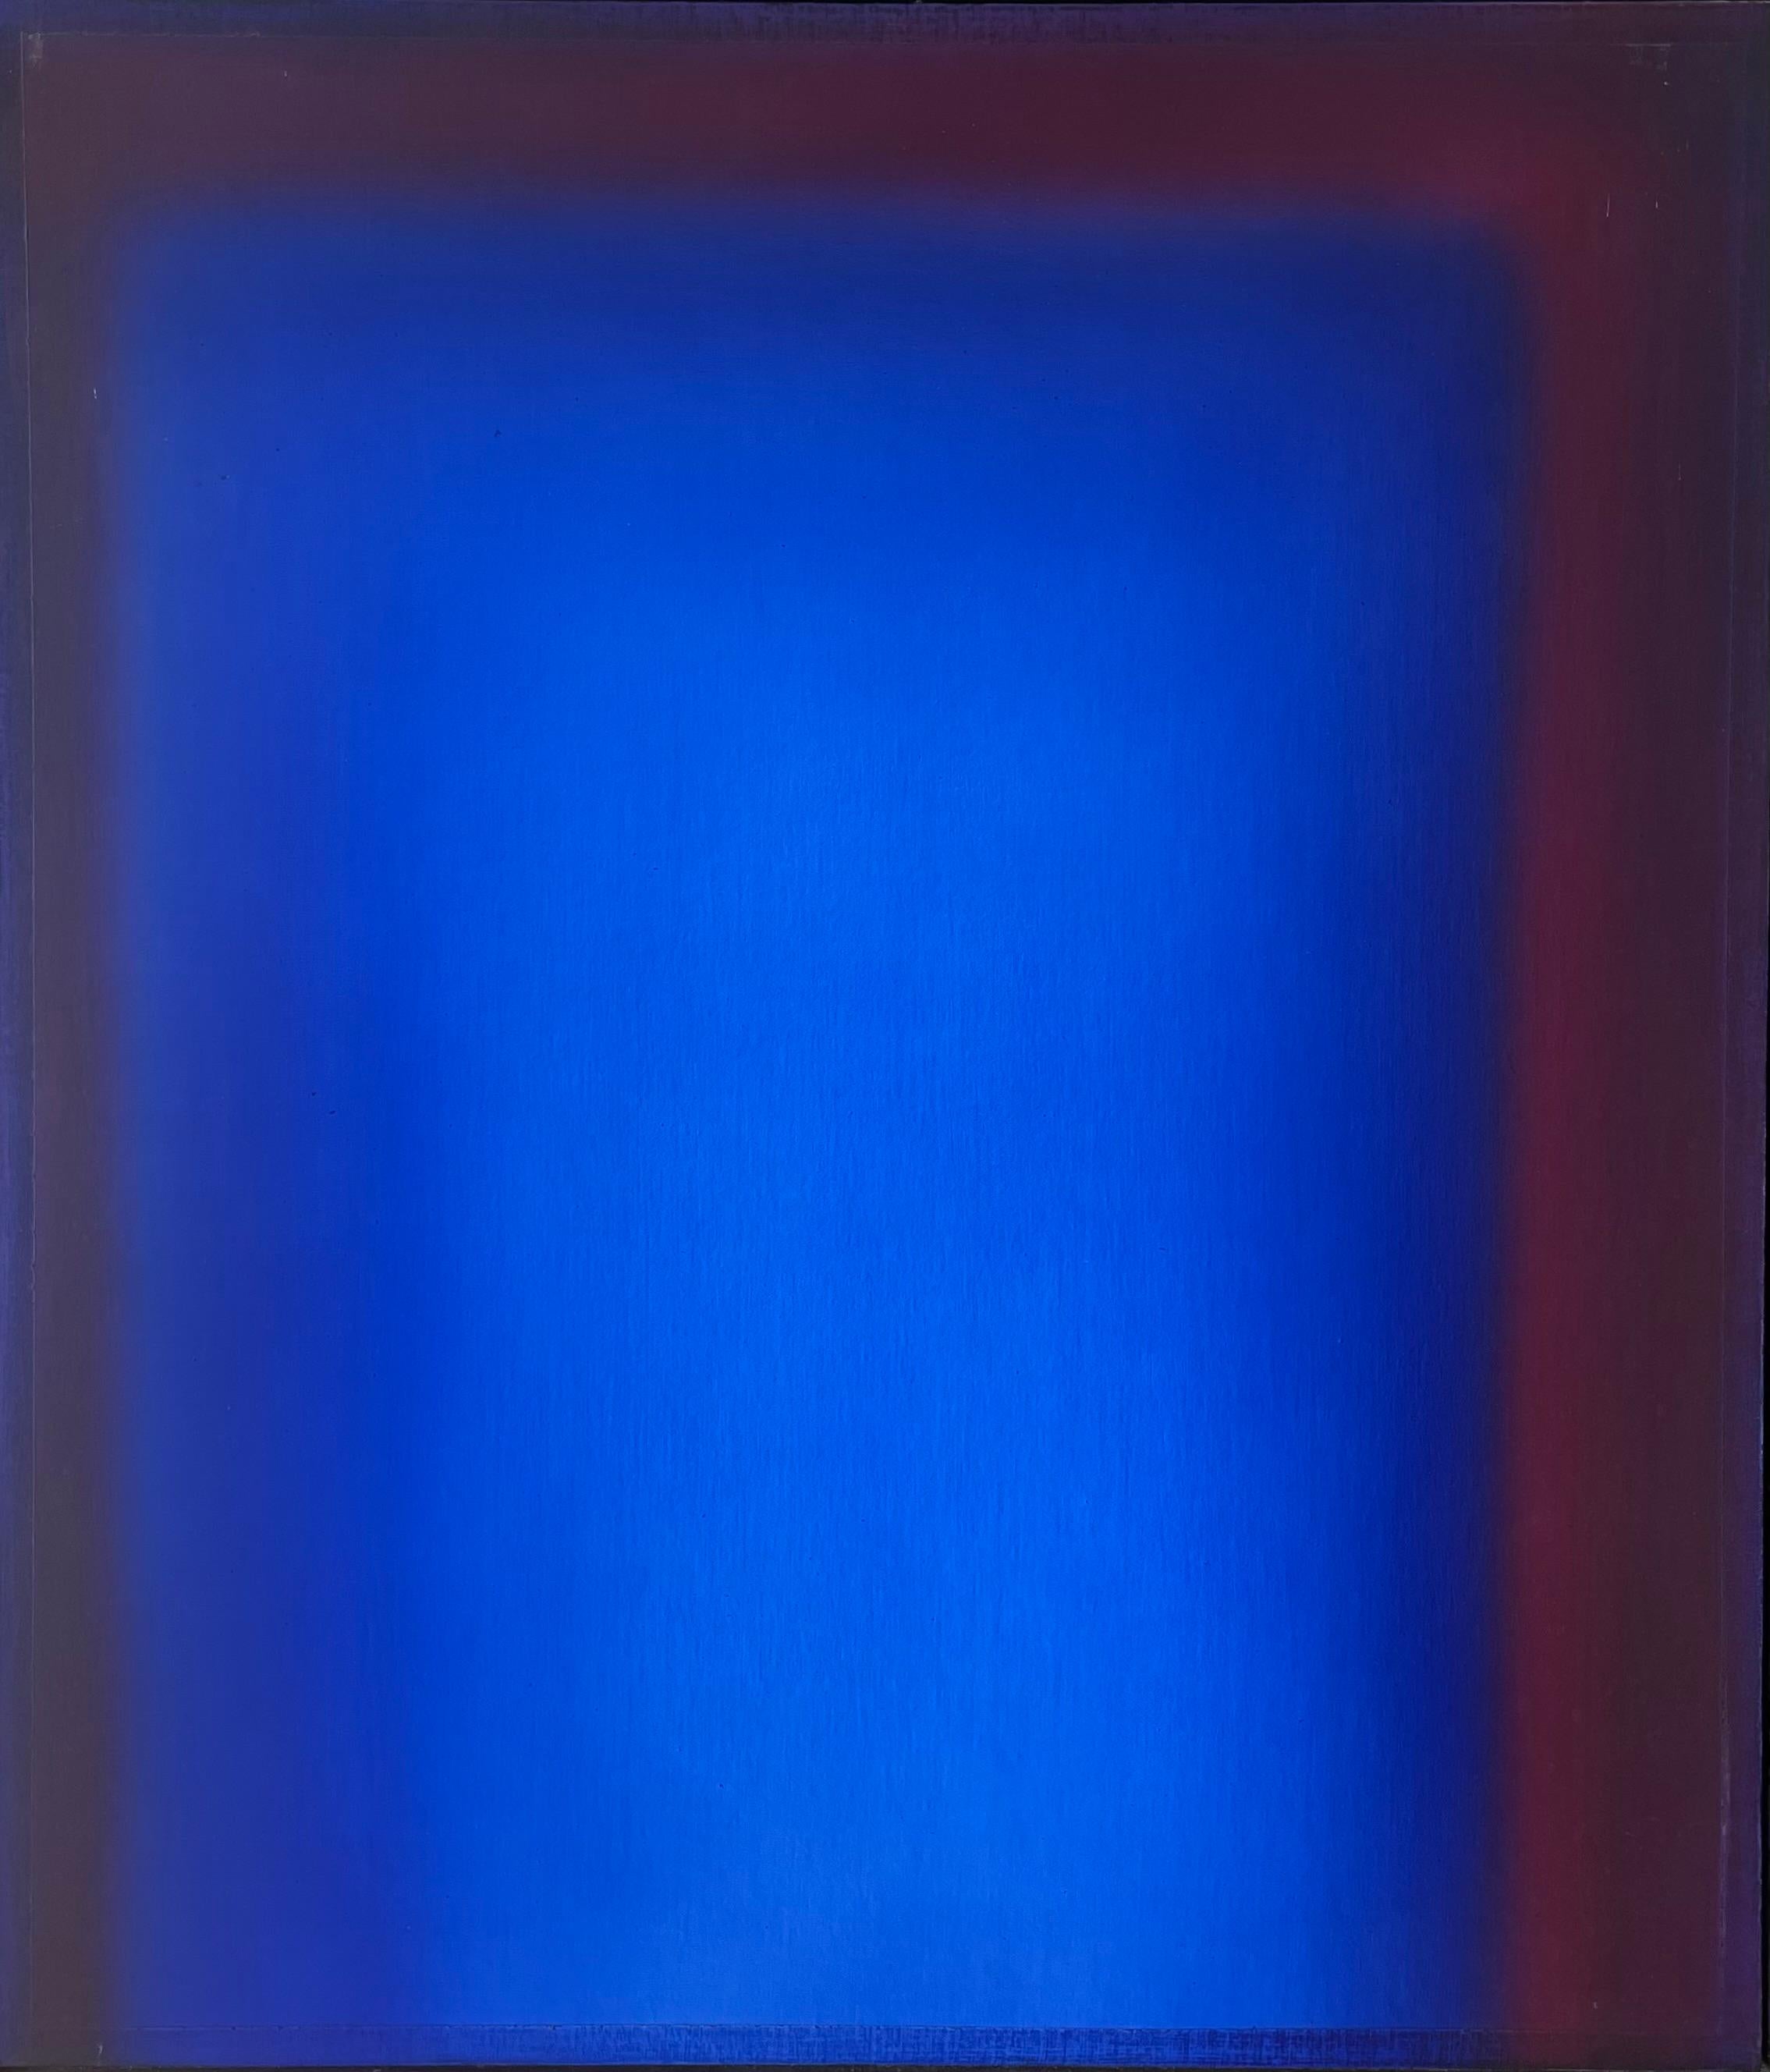 Untitled - - Blue, Maroon & Violet - Magical painting! - Painting by Eric Orr